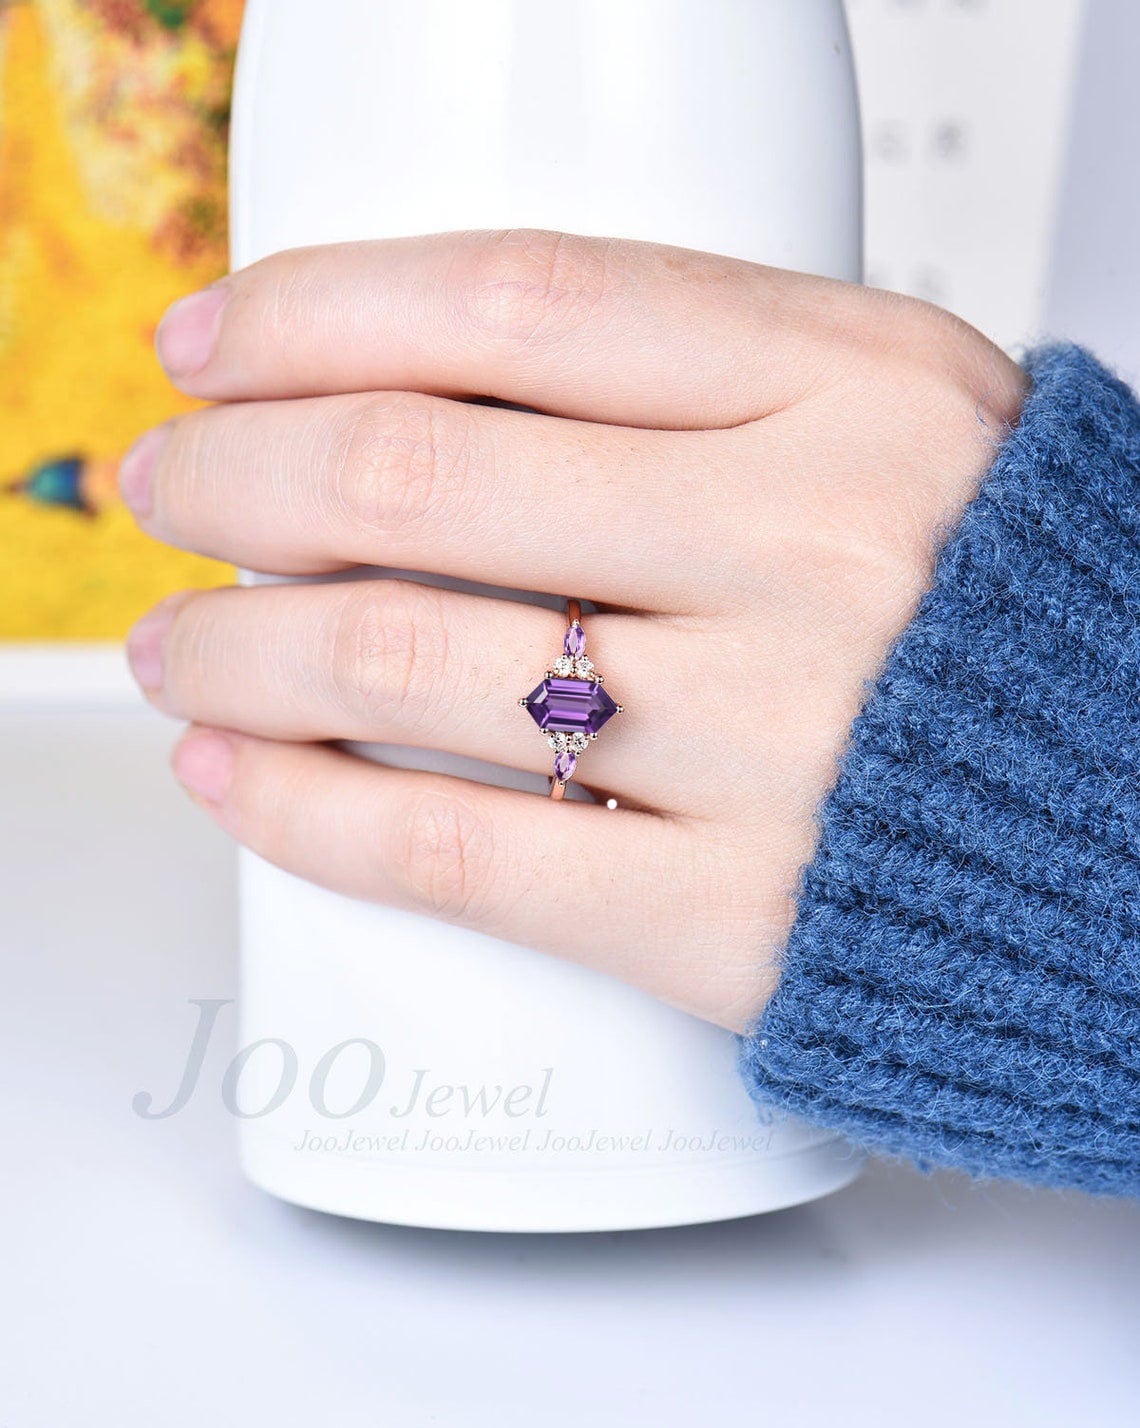 Hexagon Cut Natural Purple Amethyst Ring Unique Amethyst Engagement Ring Sterling Silver Crystal Bridal Wedding Ring Anniversary Gifts Women